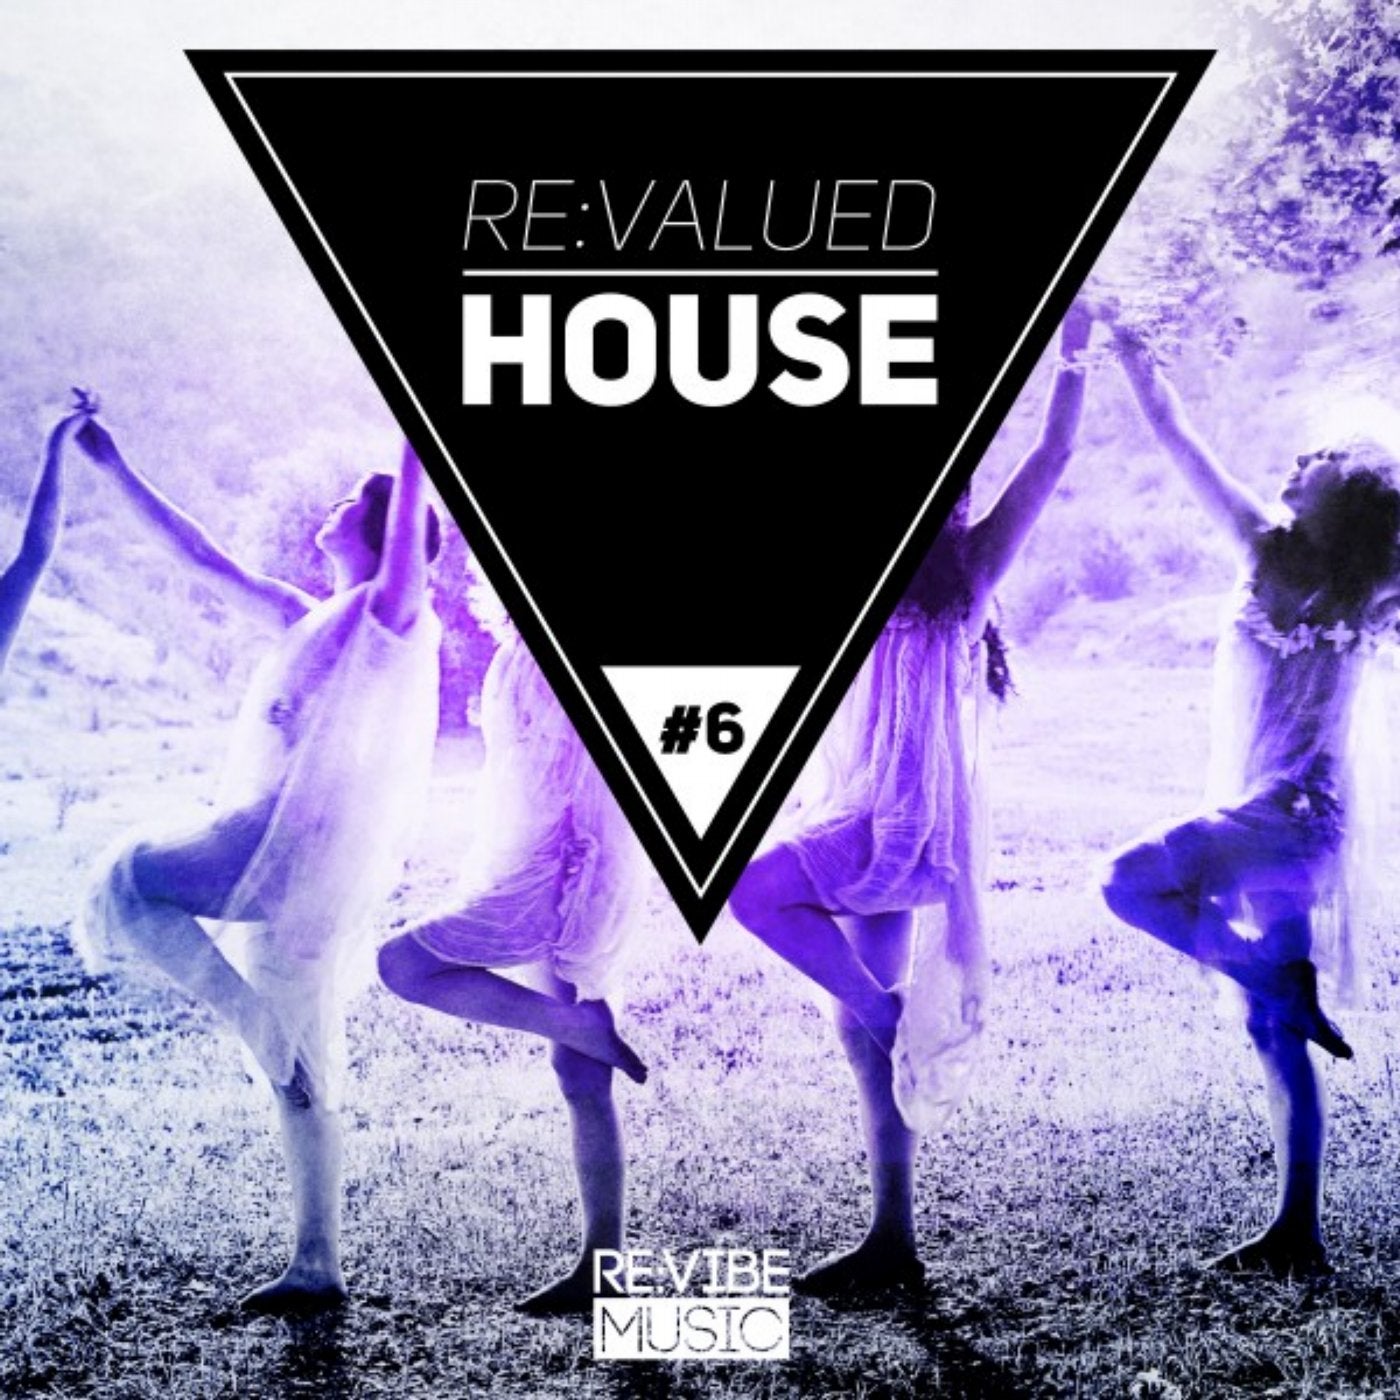 Re:Valued House, Vol. 6